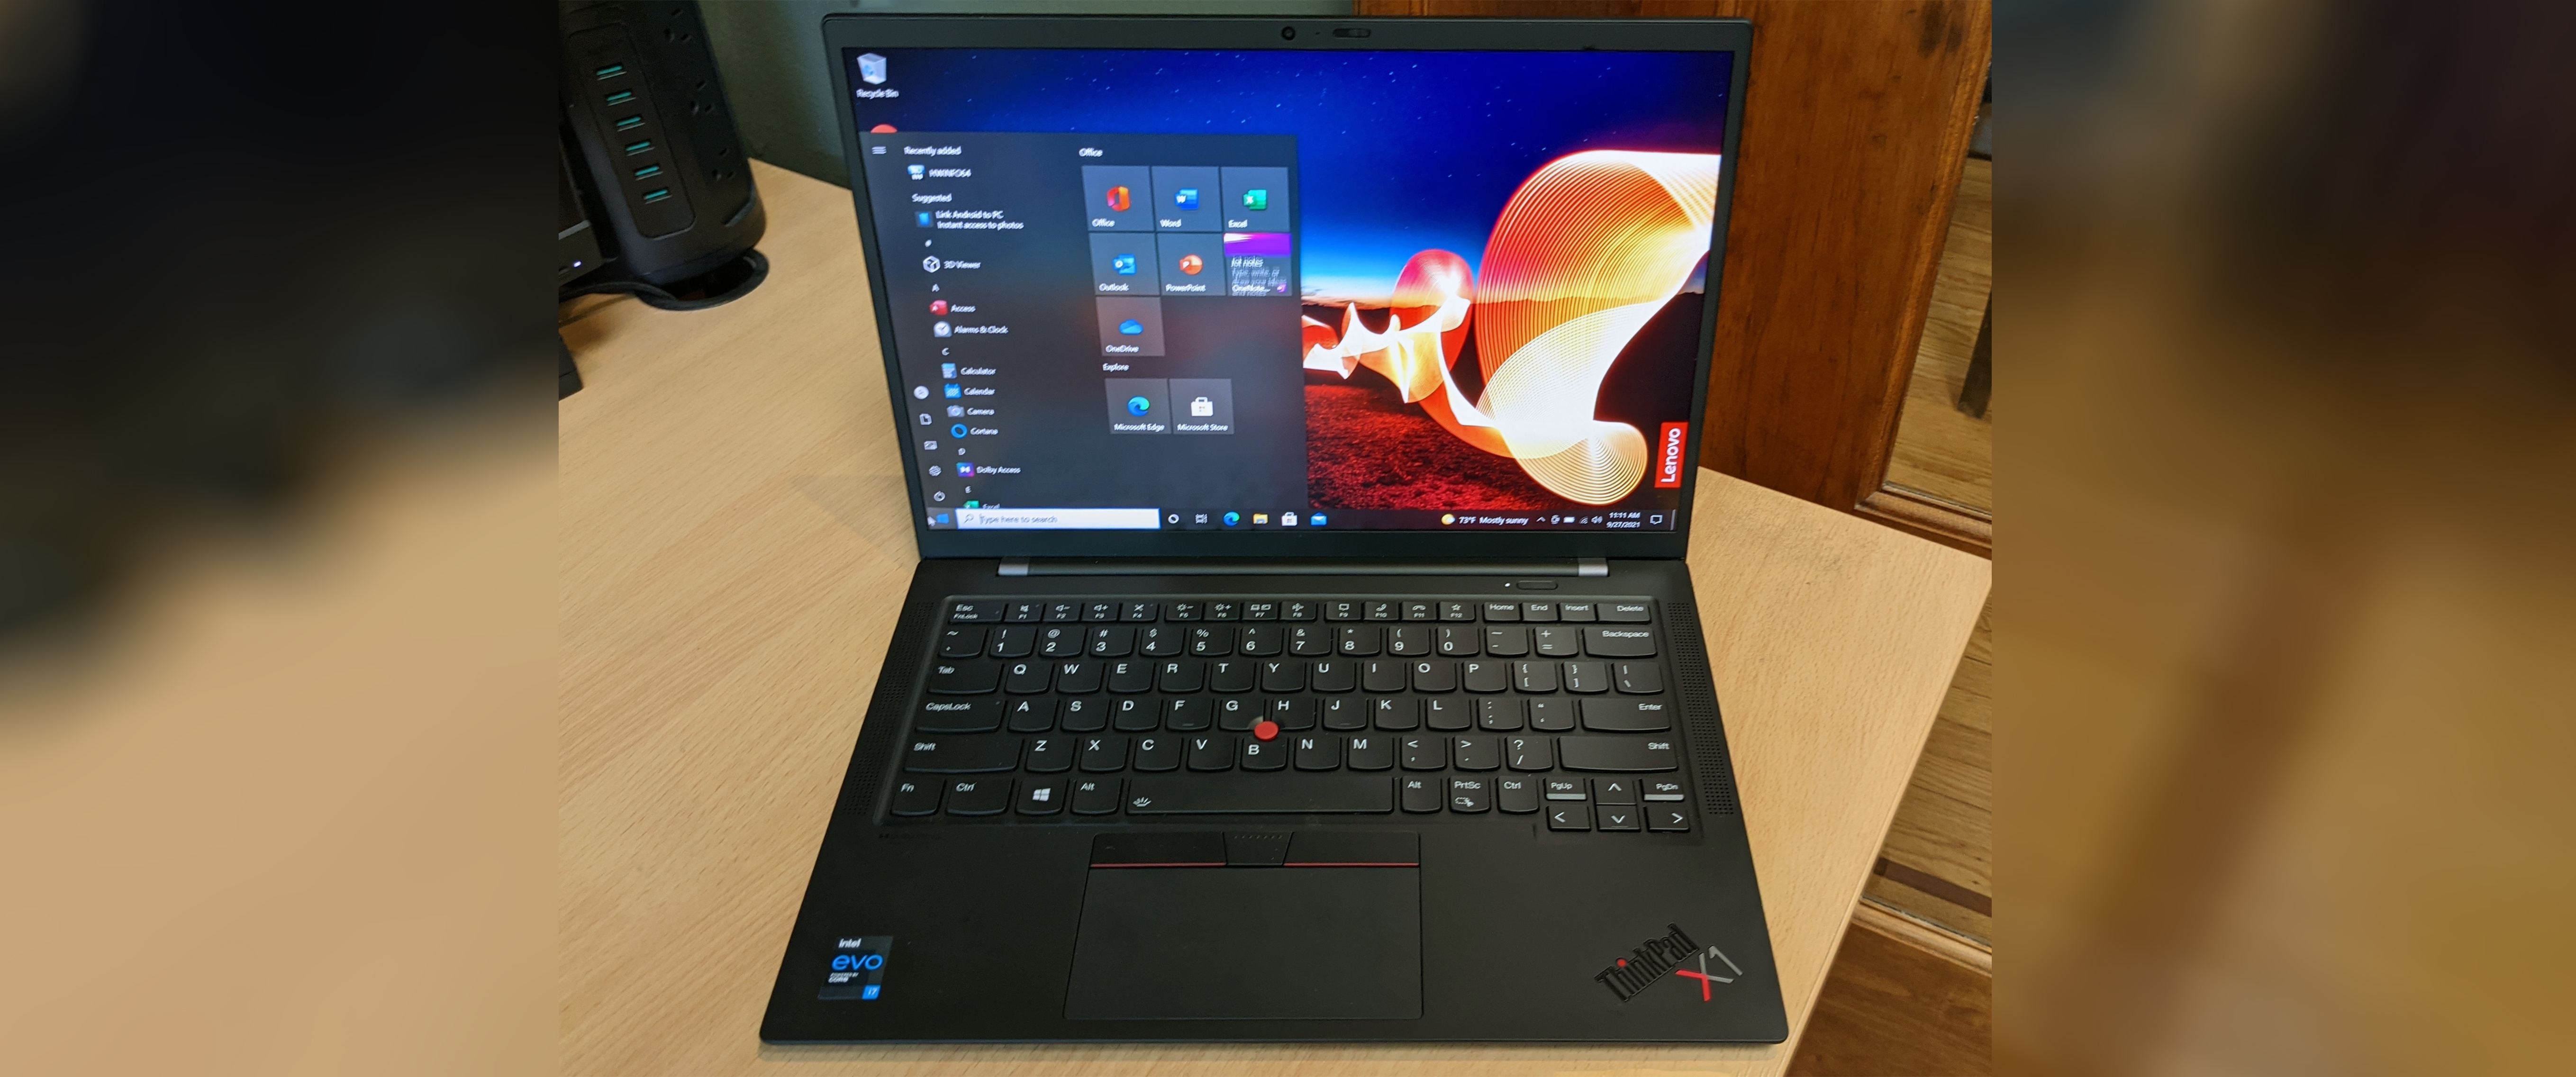 Kan ignoreres Overskyet Ydmyg Lenovo ThinkPad X1 Carbon (Gen 9) Review: Even More Productivity Prowess |  Tom's Hardware